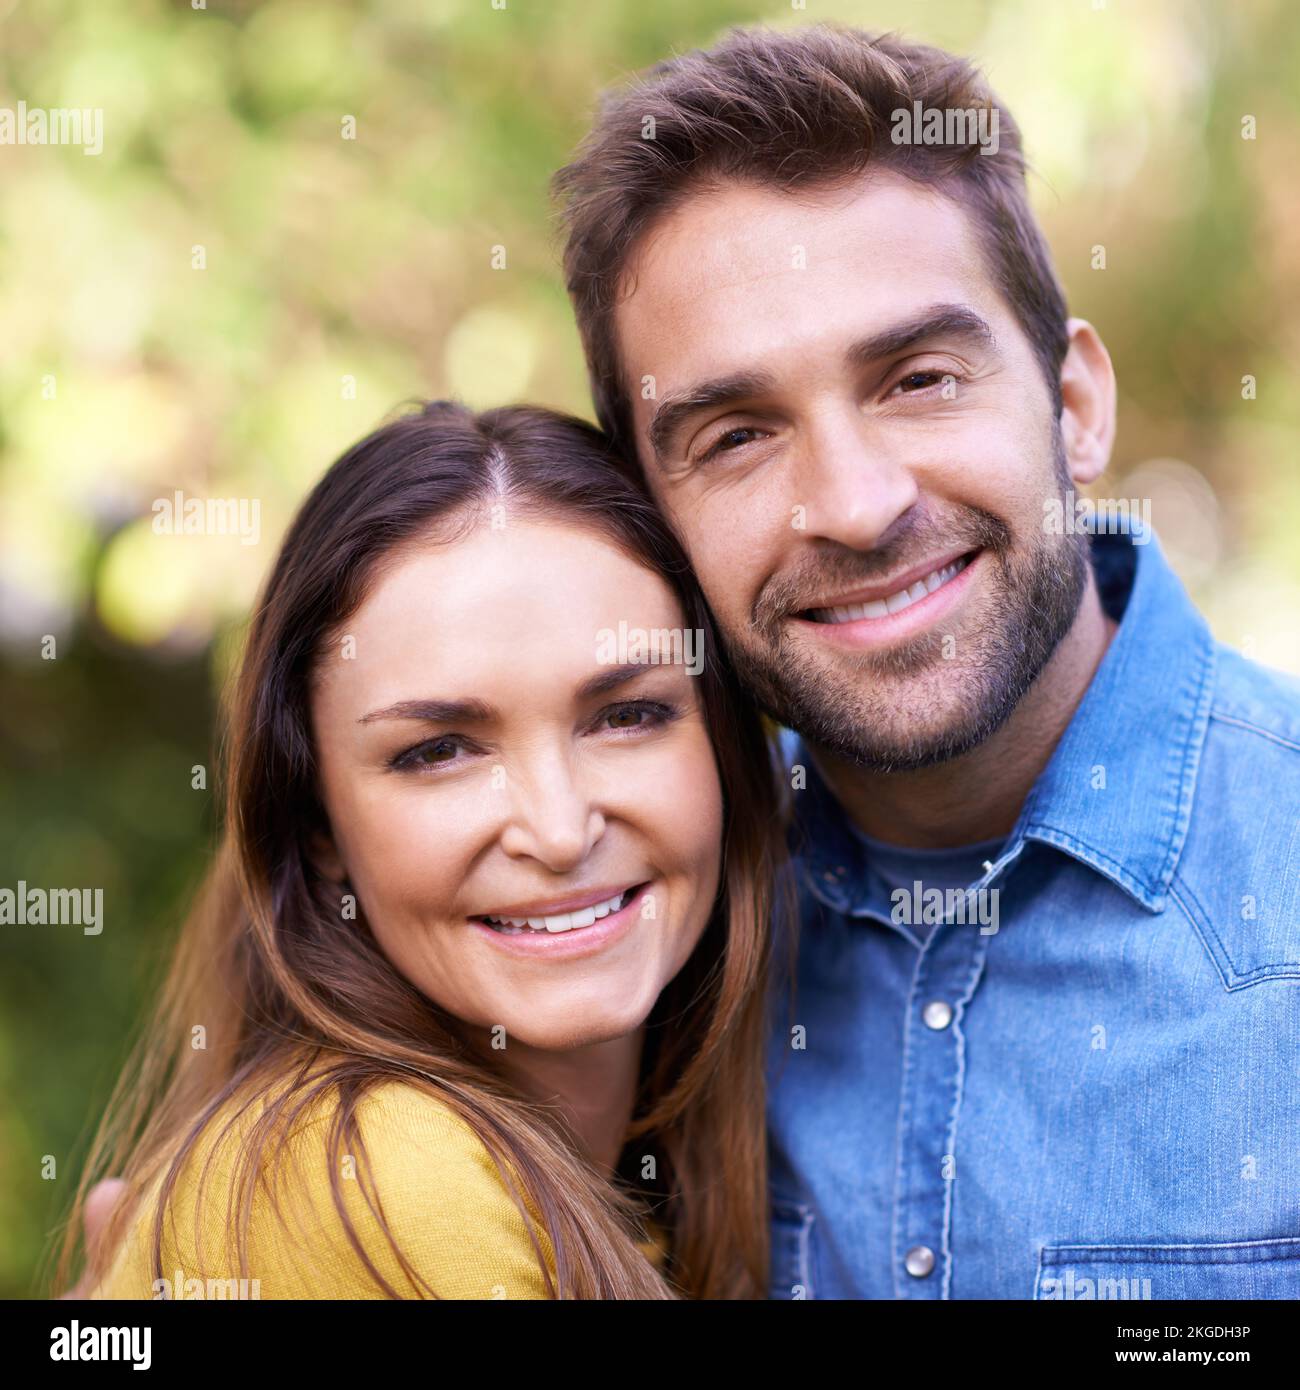 They are the perfect couple. Closeup portrait of a loving young couple in the outdoors. Stock Photo